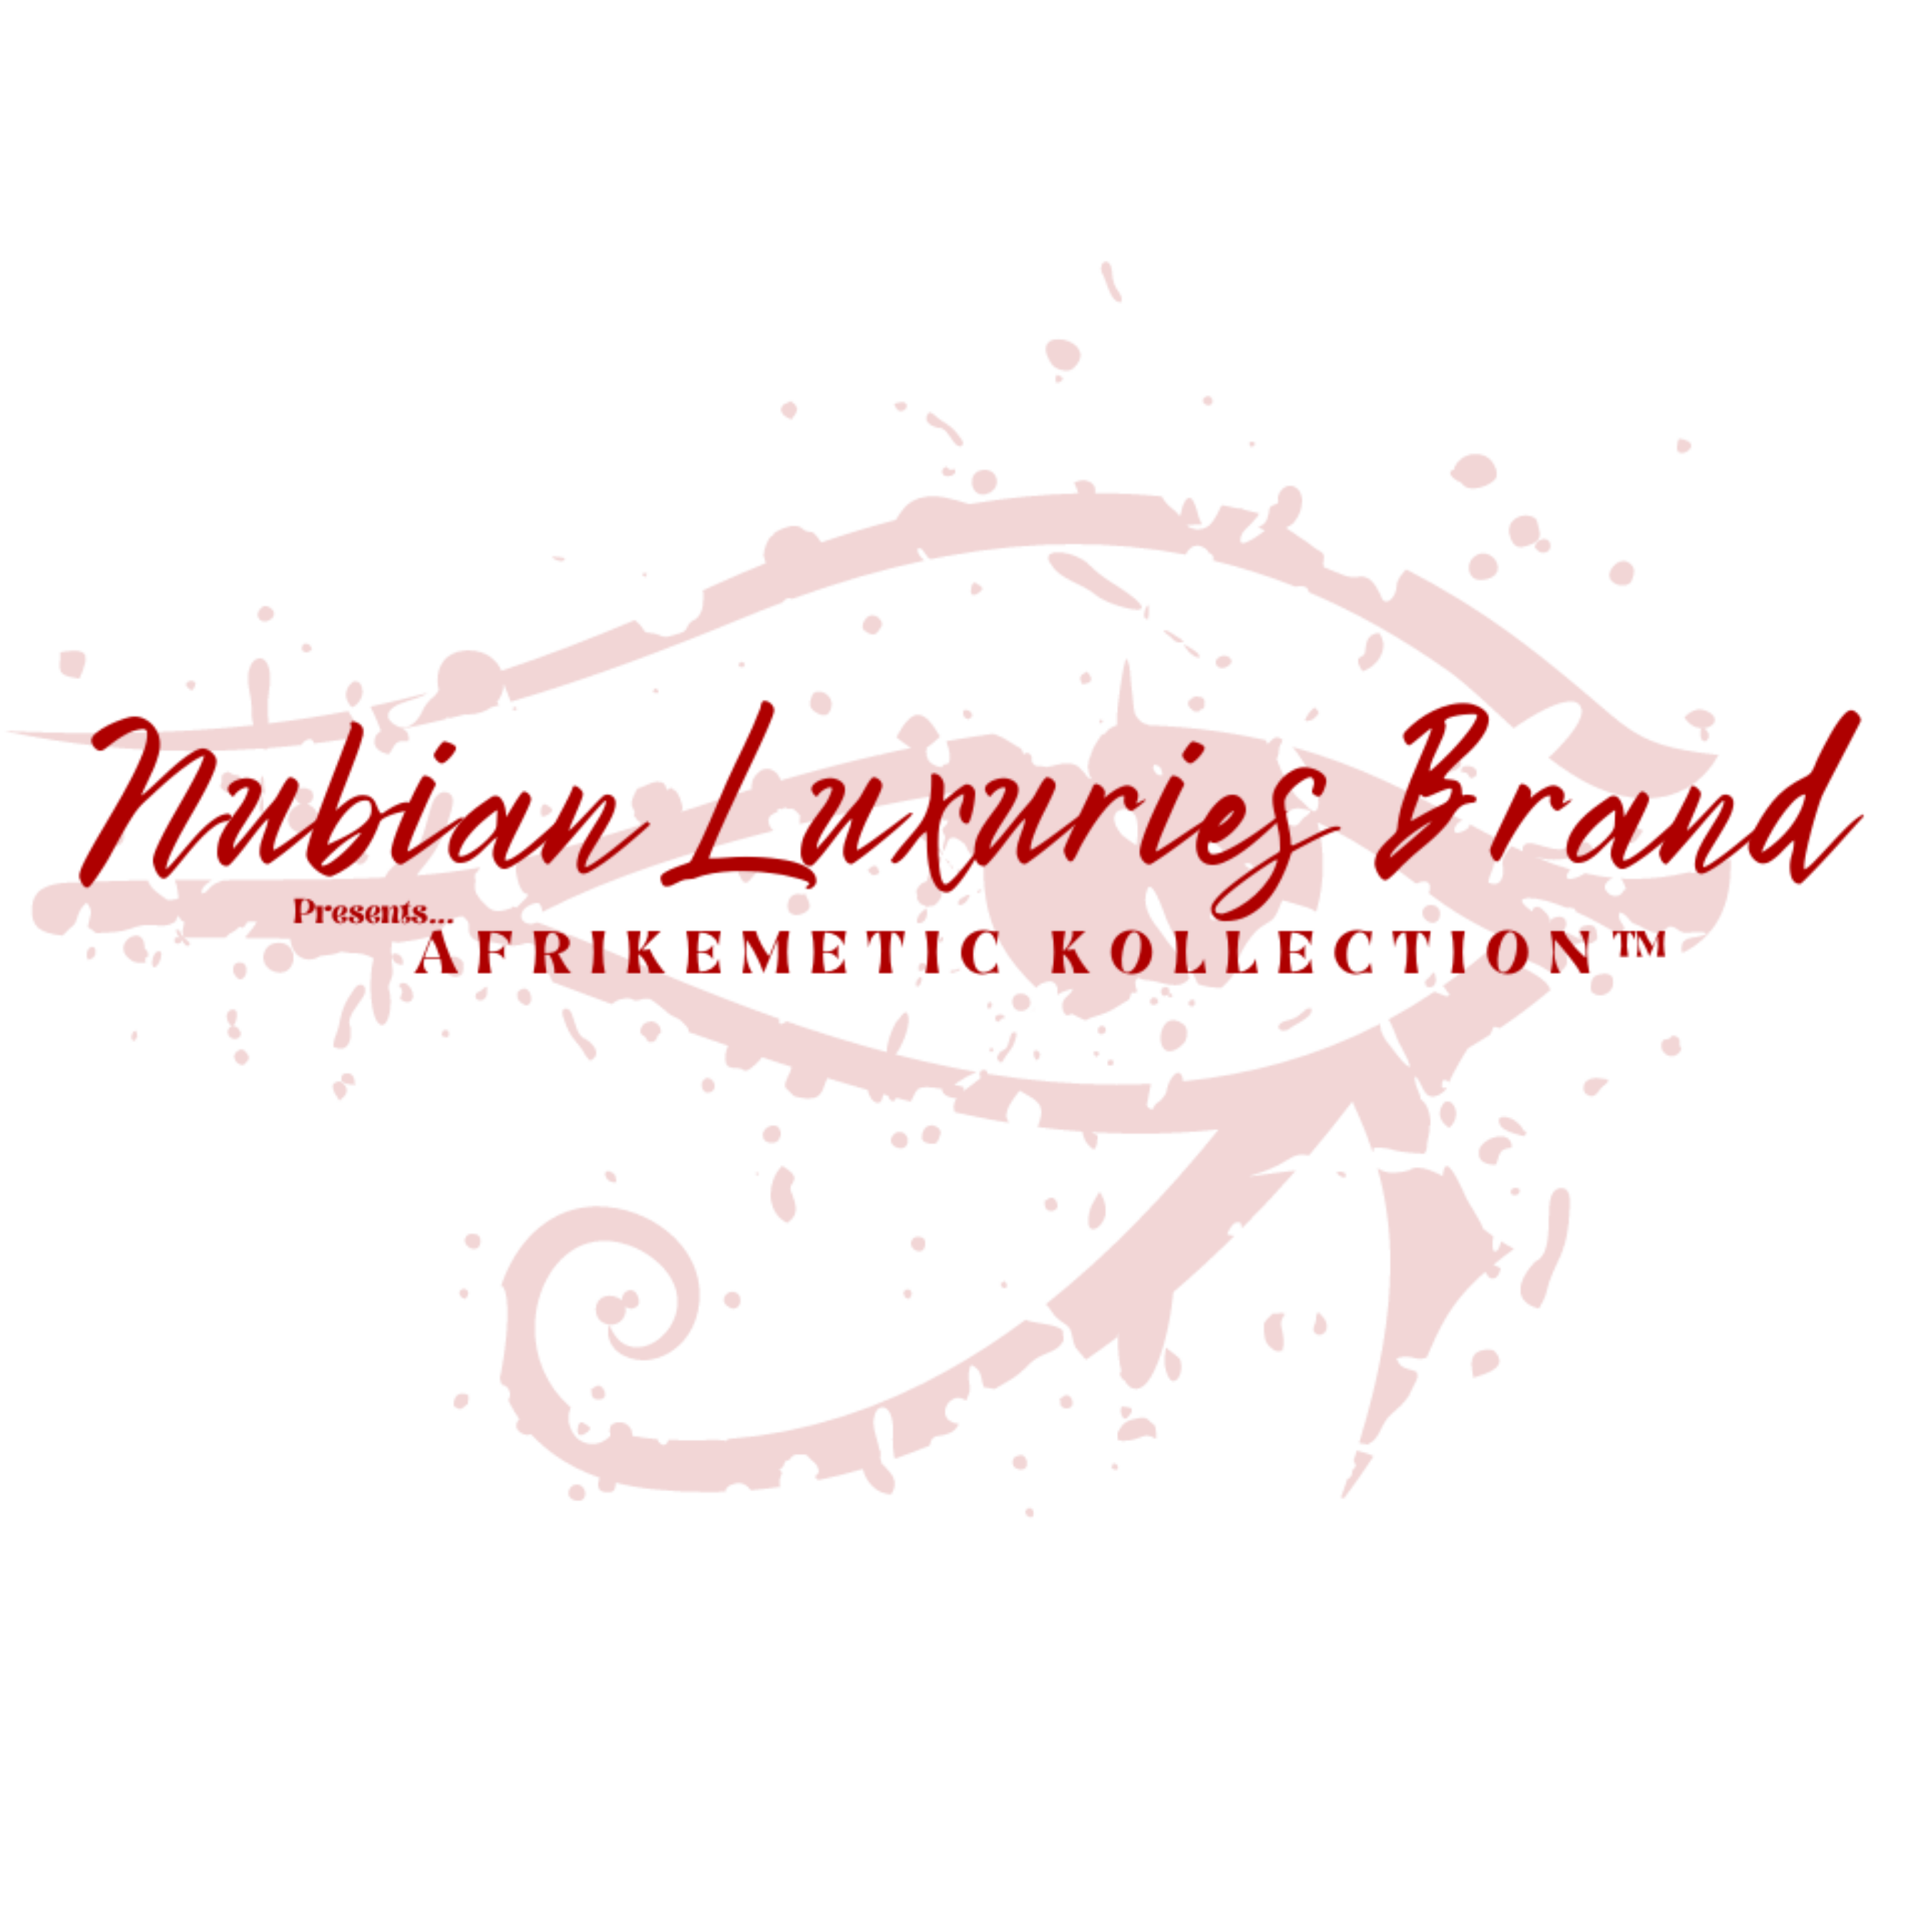 The logo or business face of "Nubian Luxuries Brand"